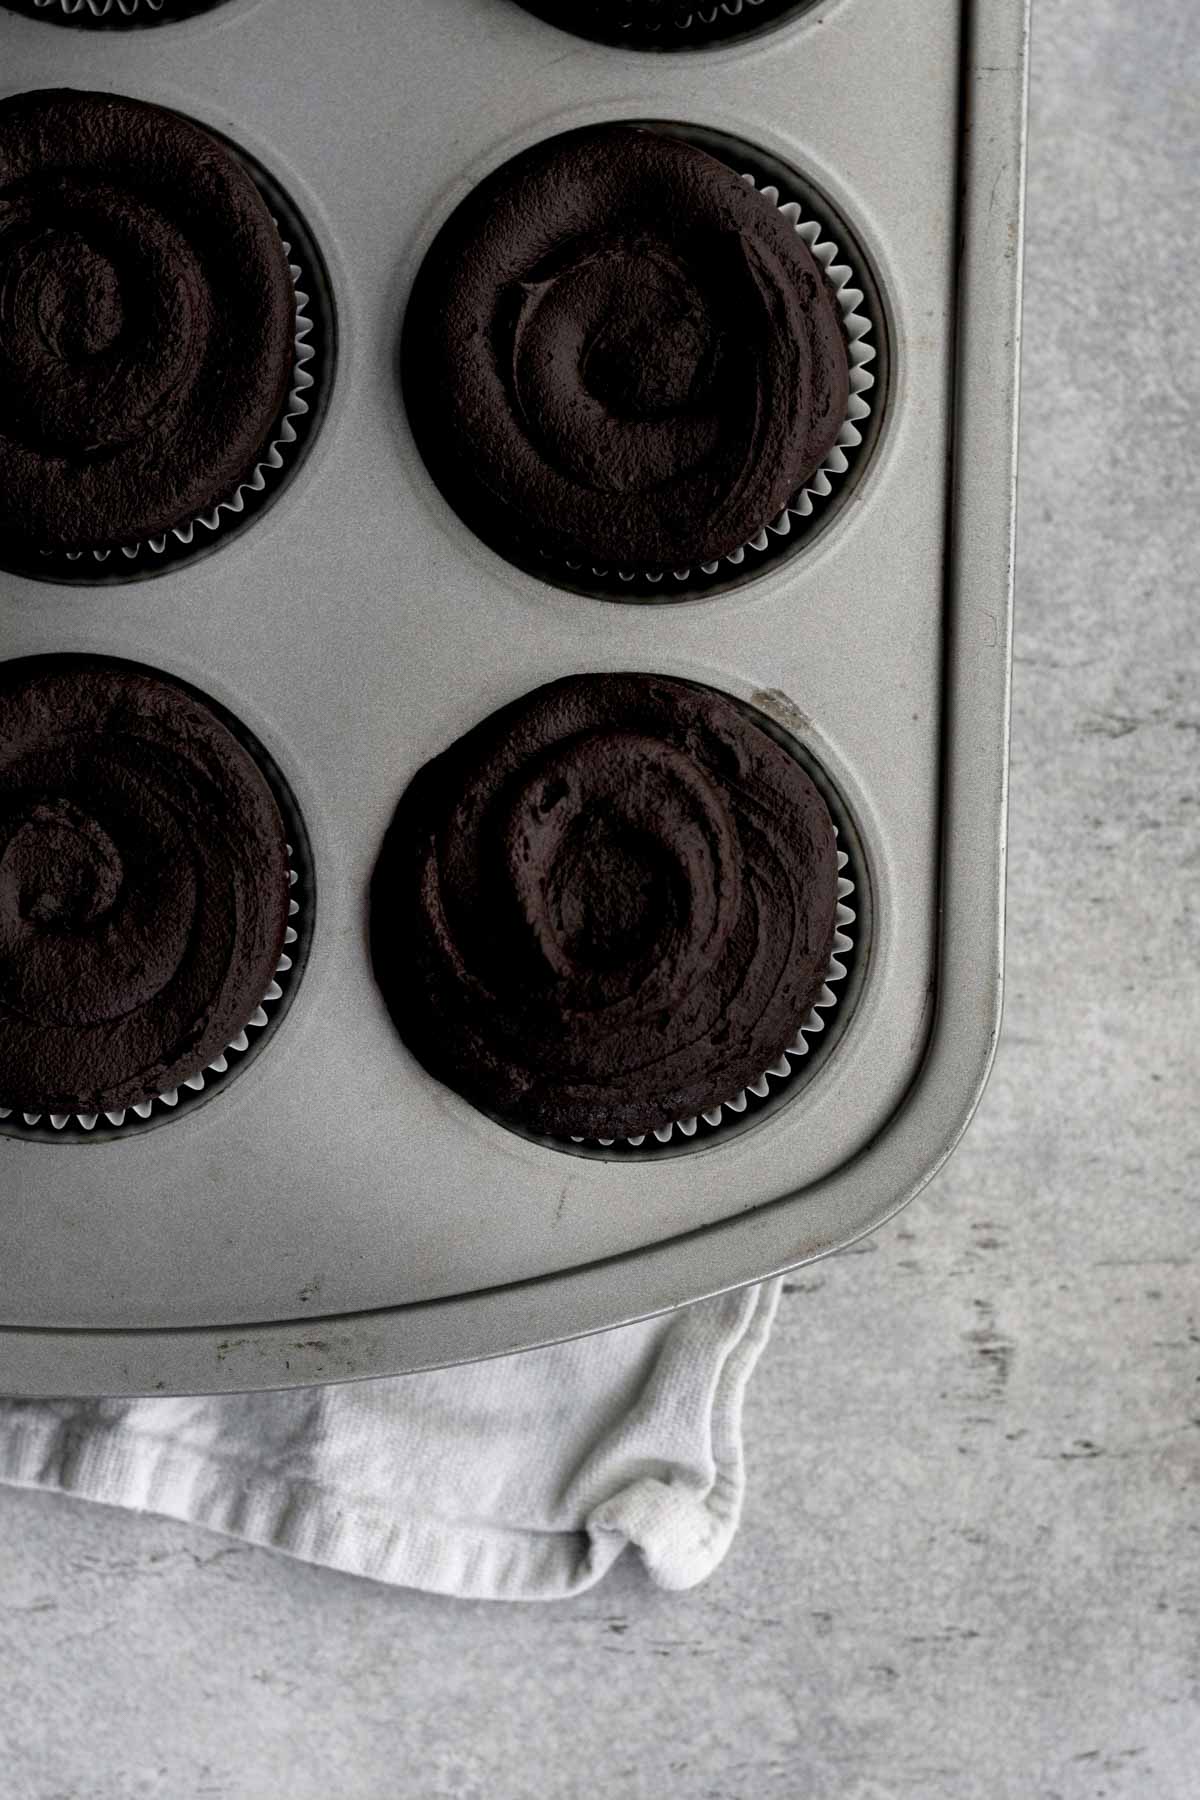 Chocolate frosted cupcakes in a cupcake tin.